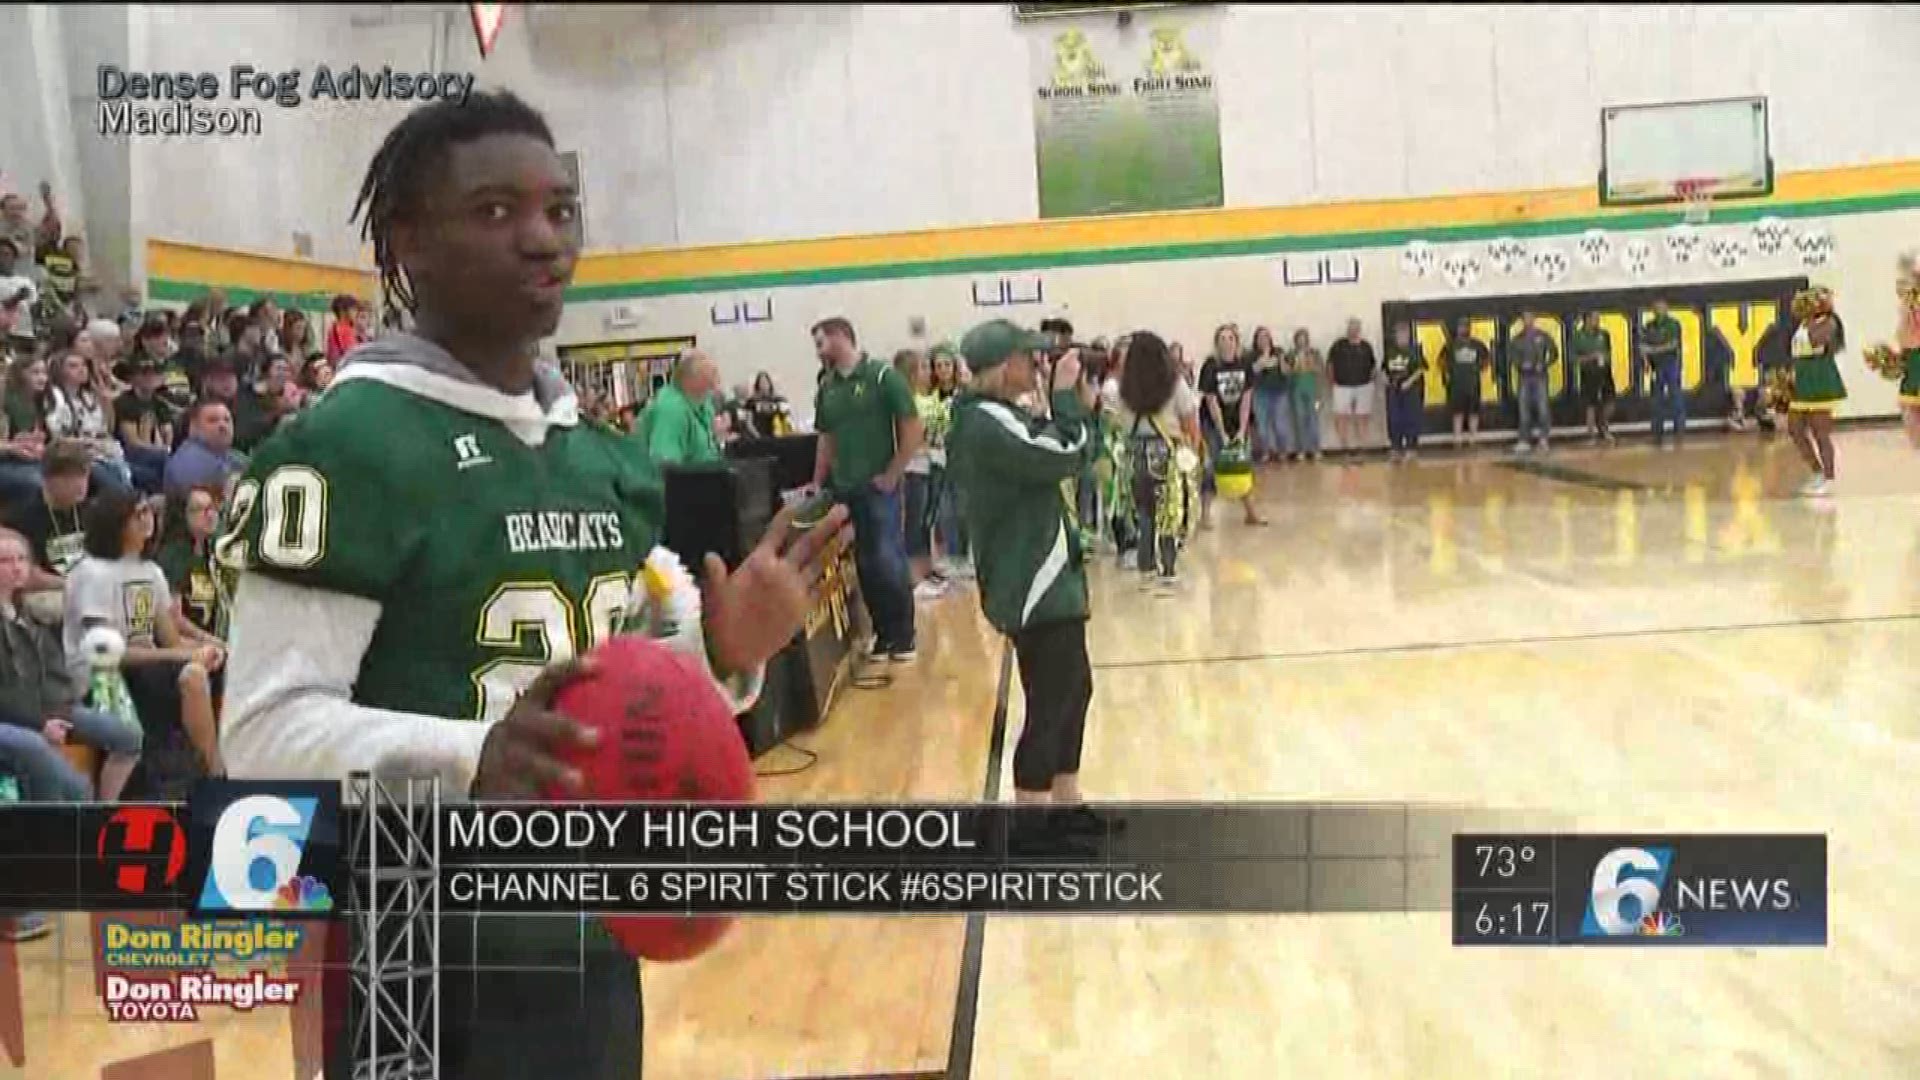 Moody High wins the Channel 6 Spirit Stick